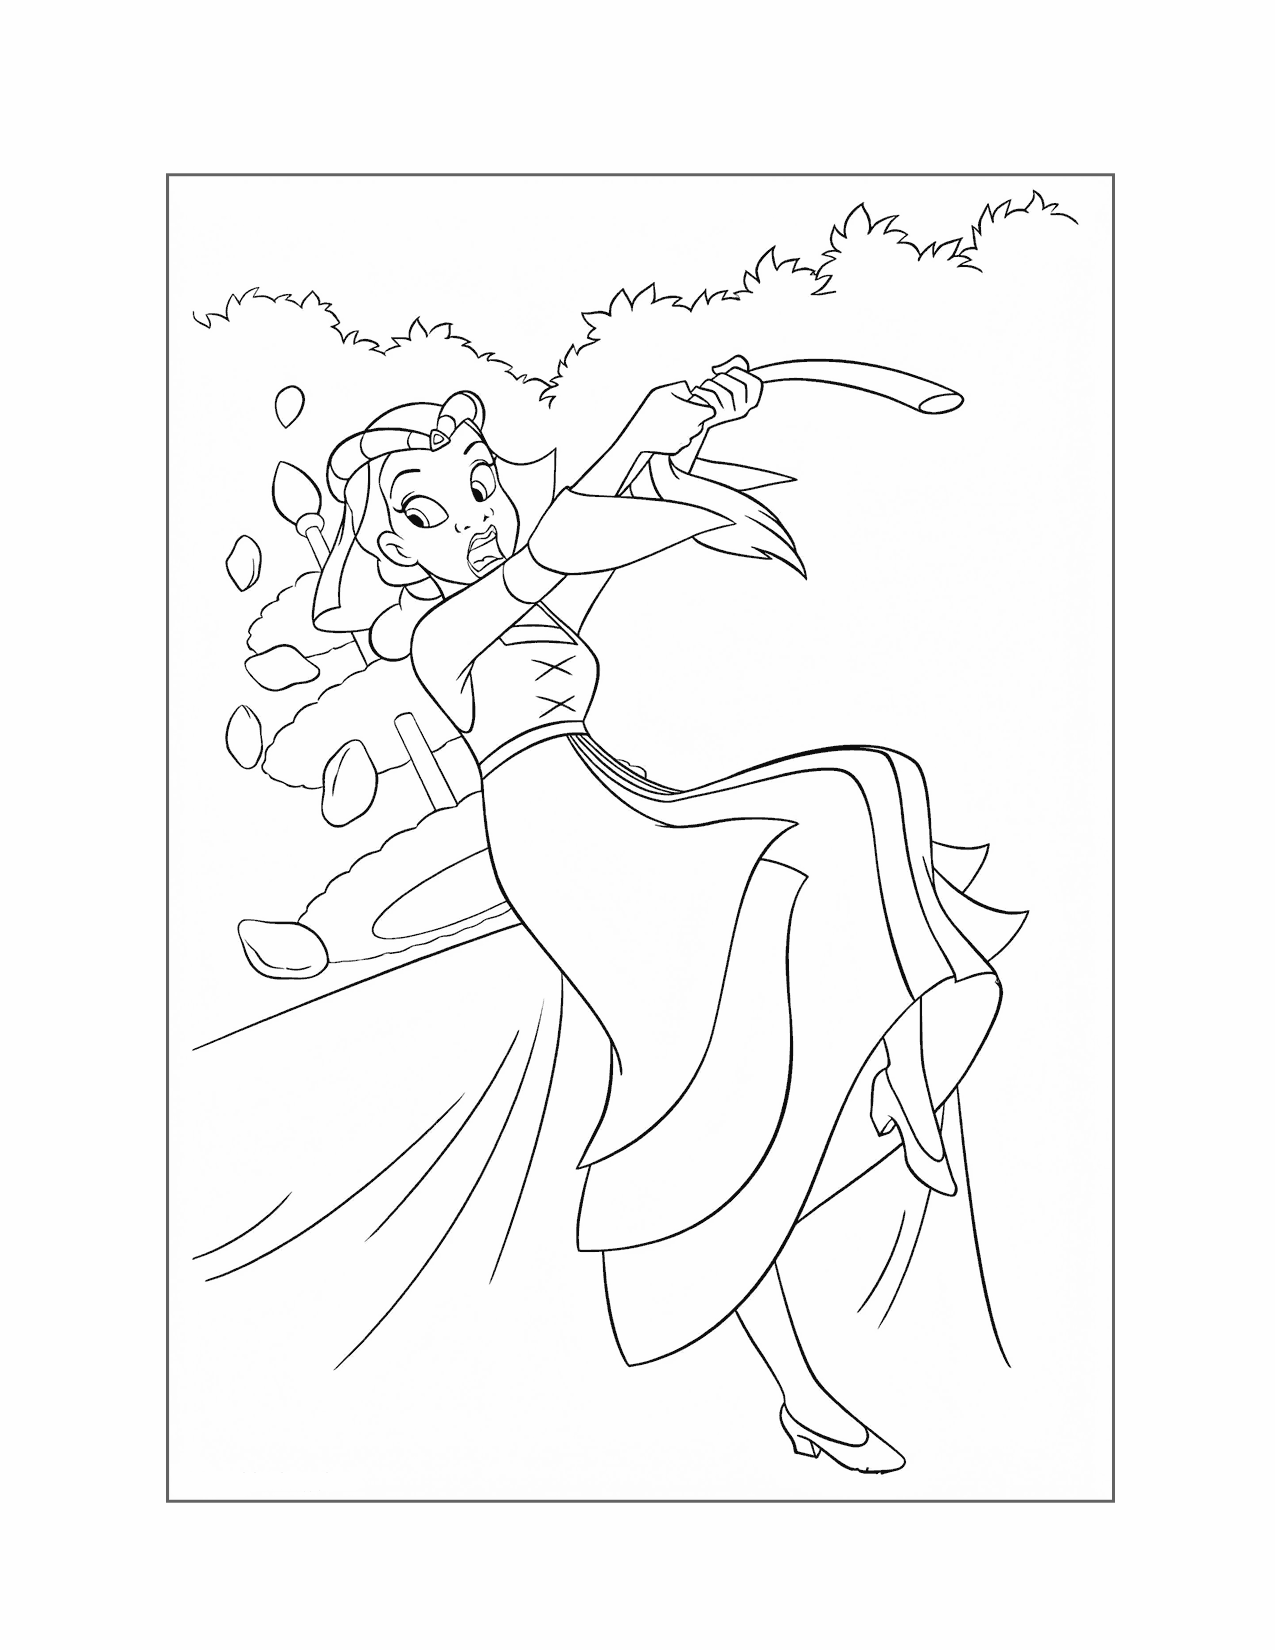 Tiana Is Clumsy Coloring Page